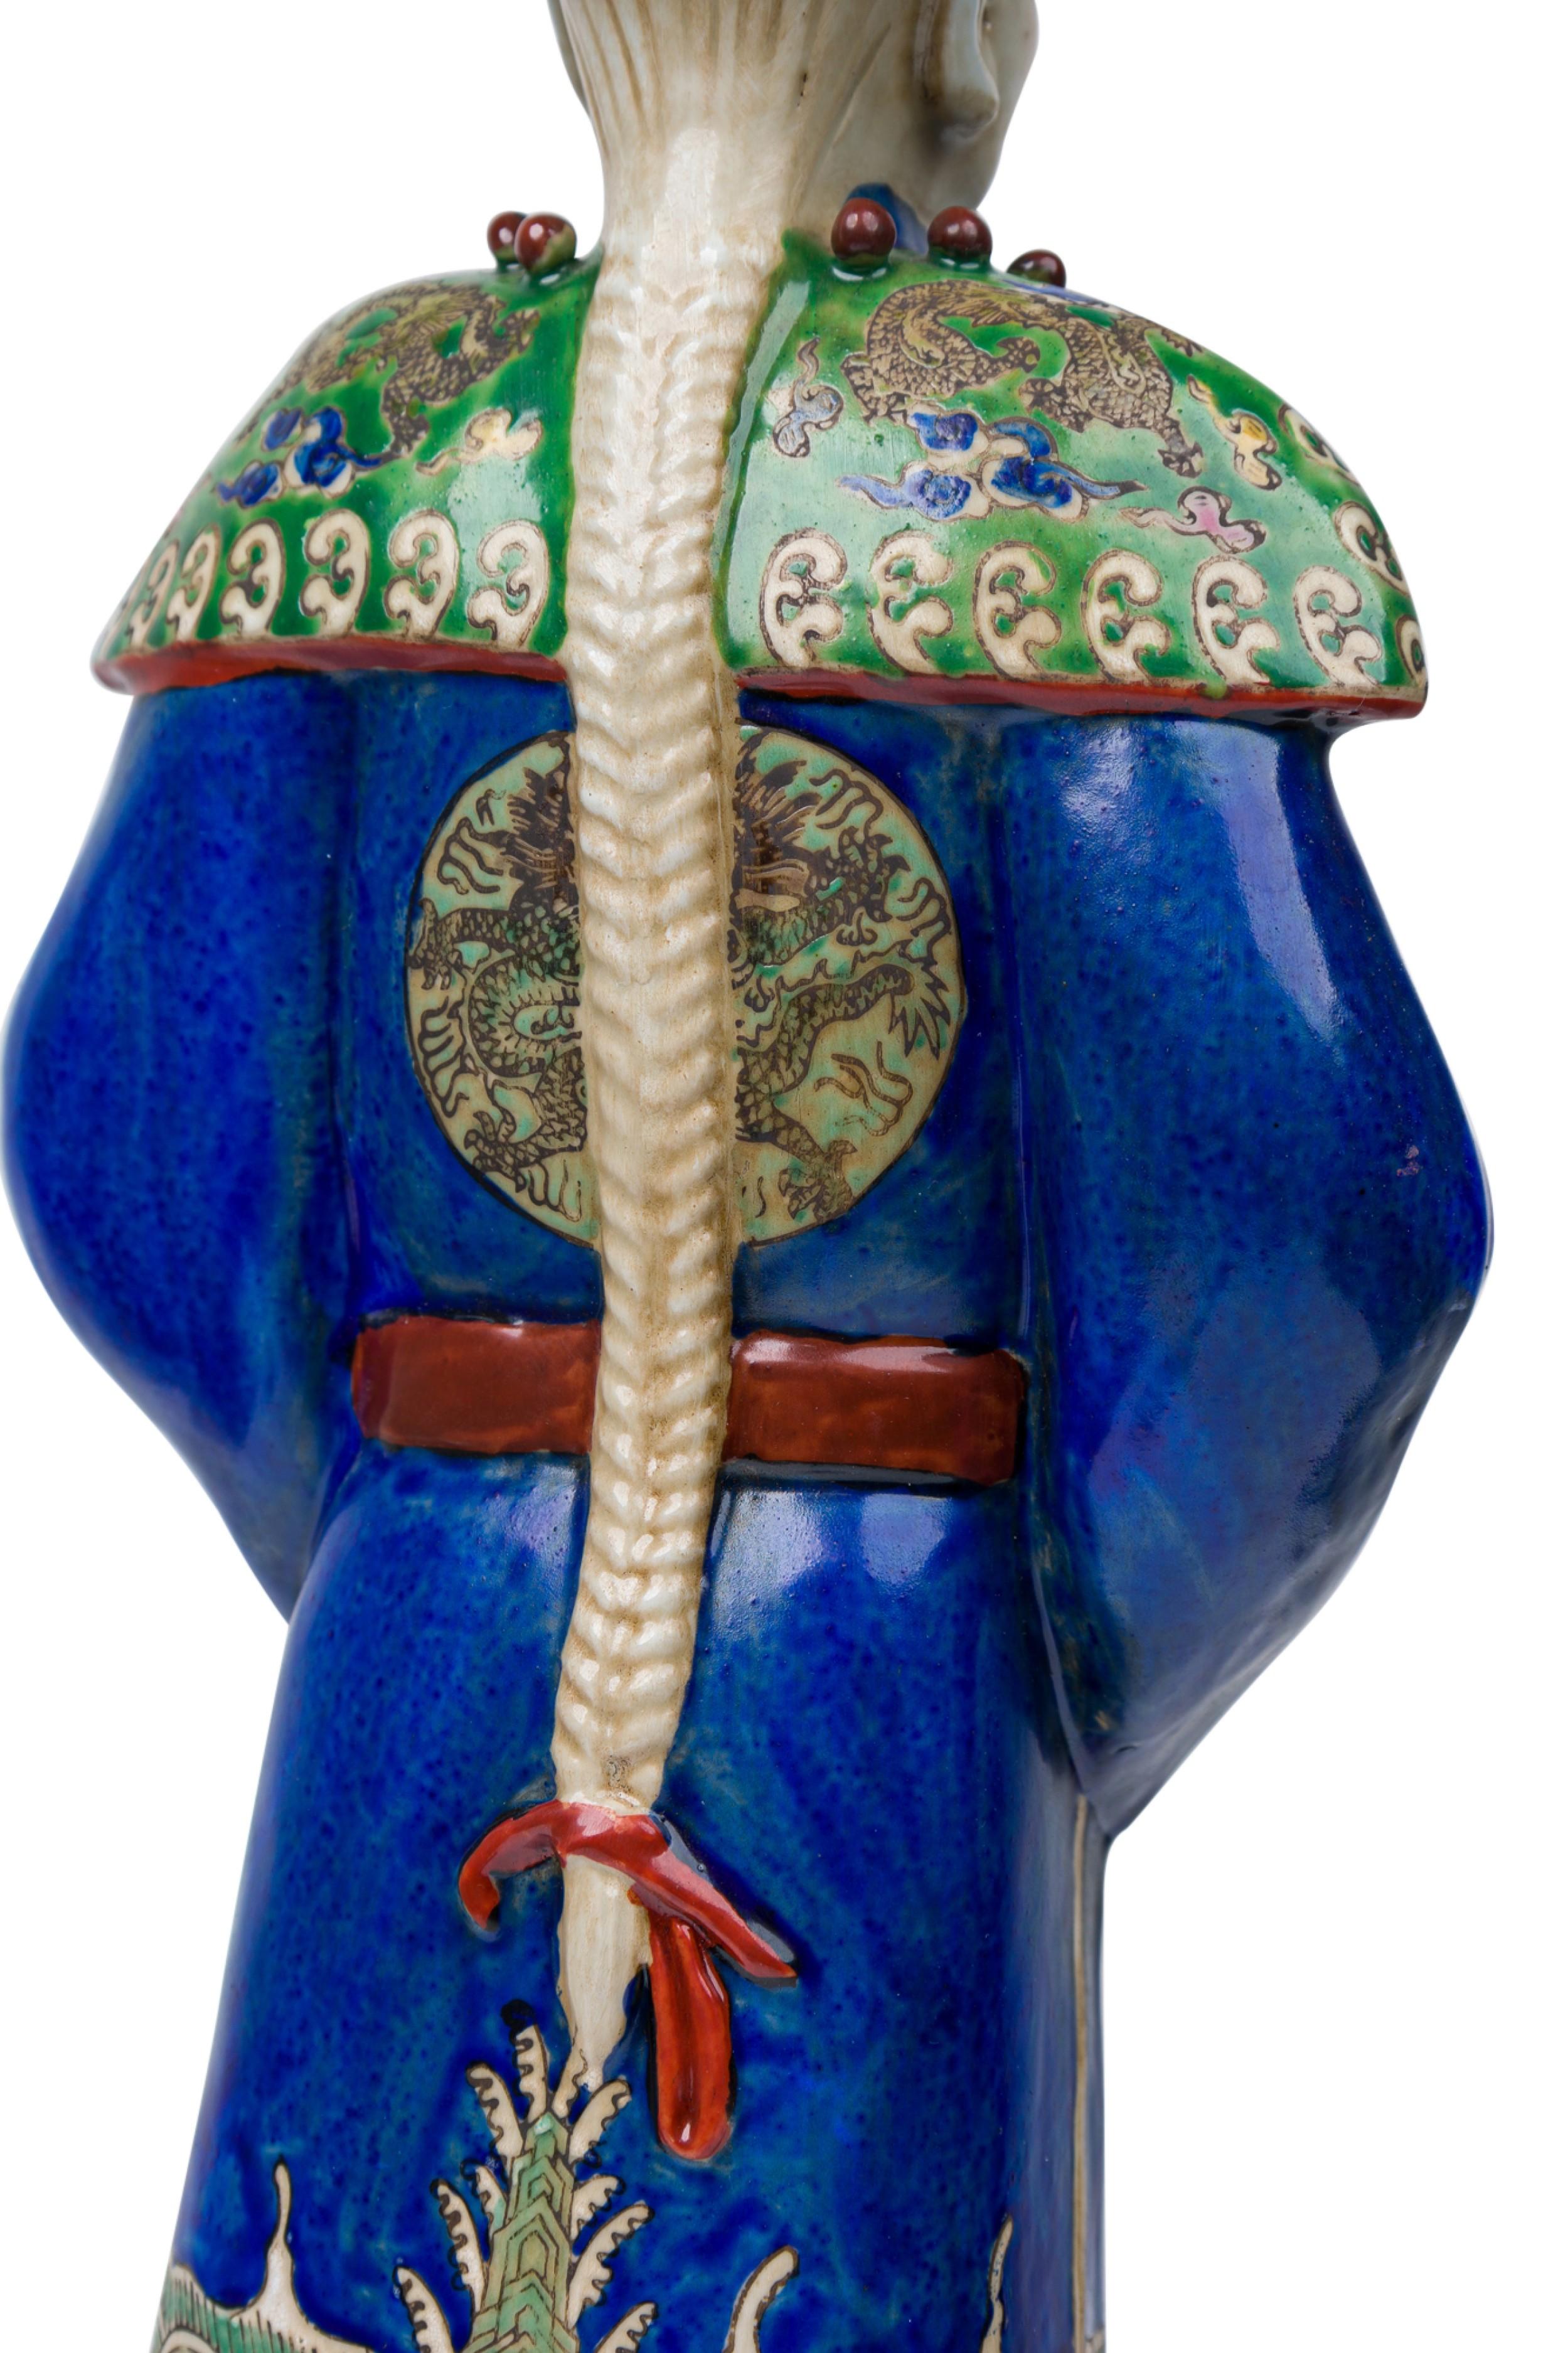 Pair of Chinese Painted Ceramic Figures Depicting a Blue Robed Emperor In Good Condition For Sale In New York, NY